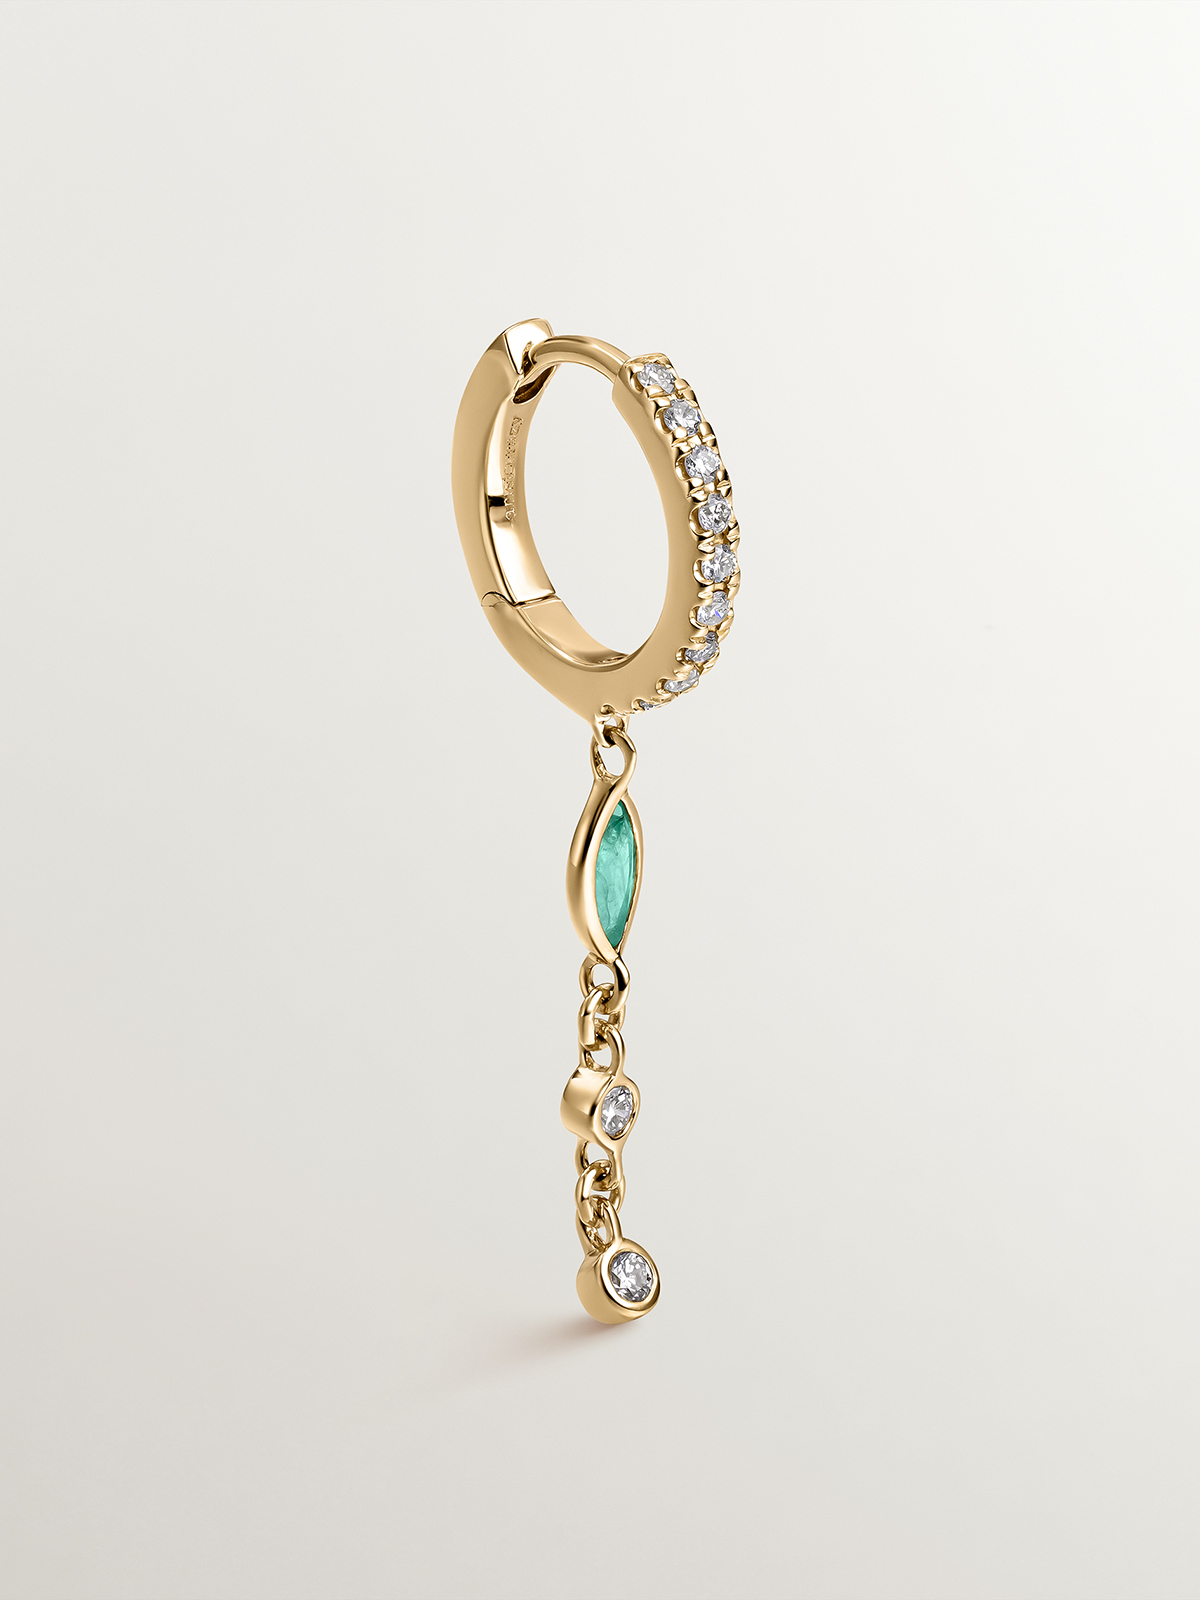 Individual small hoop earring made of 9K yellow gold with a diamond chain and emerald.